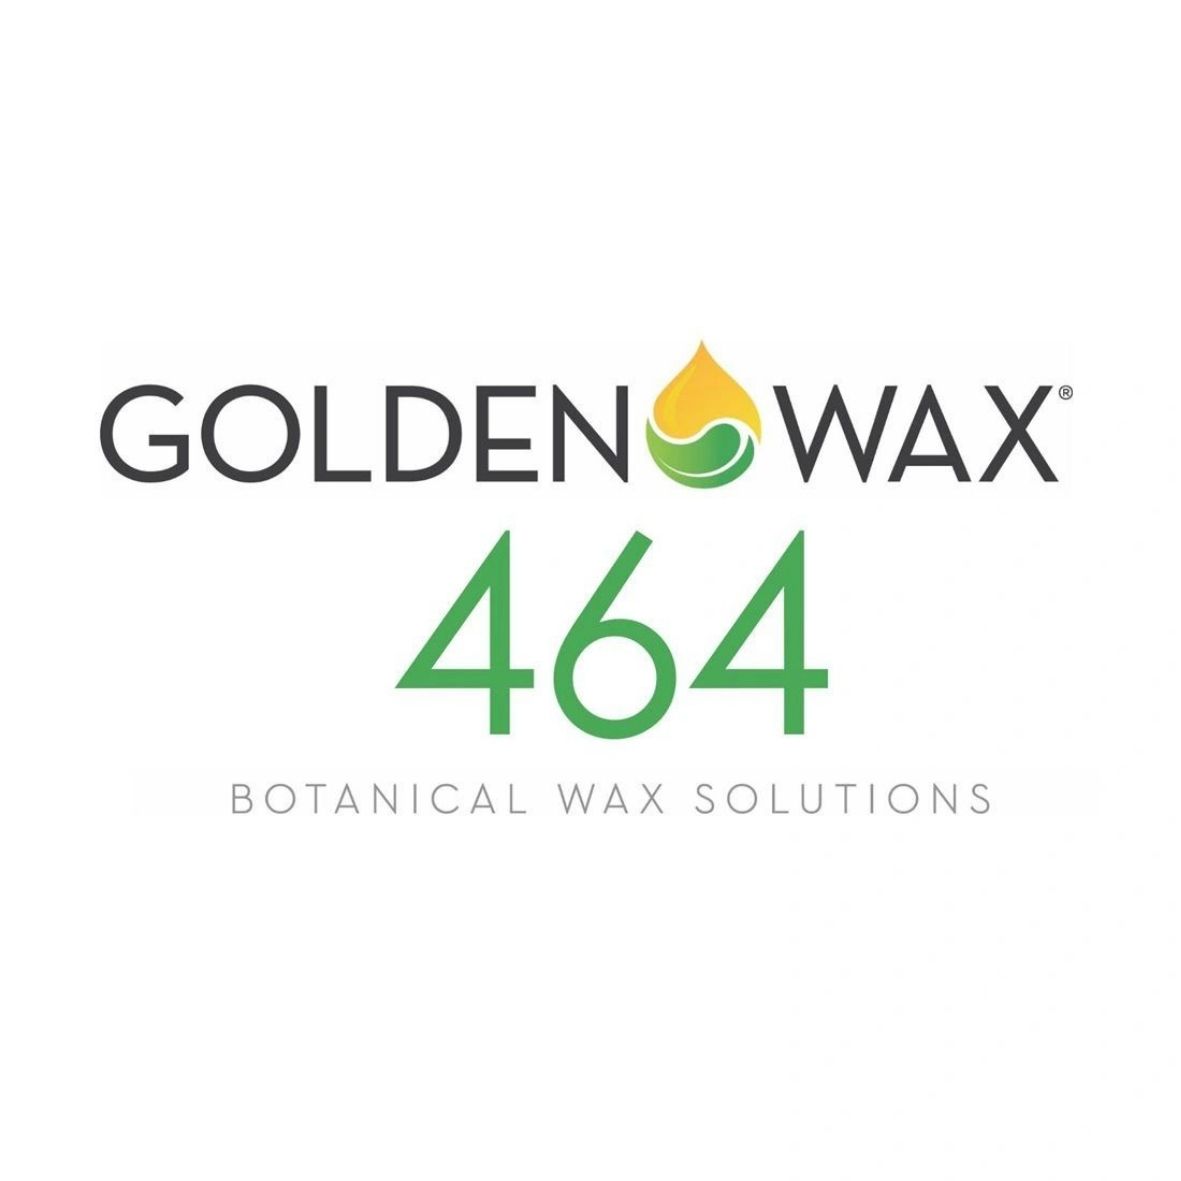 How To Make Container Candles Using Golden Brands 464 Soy Wax